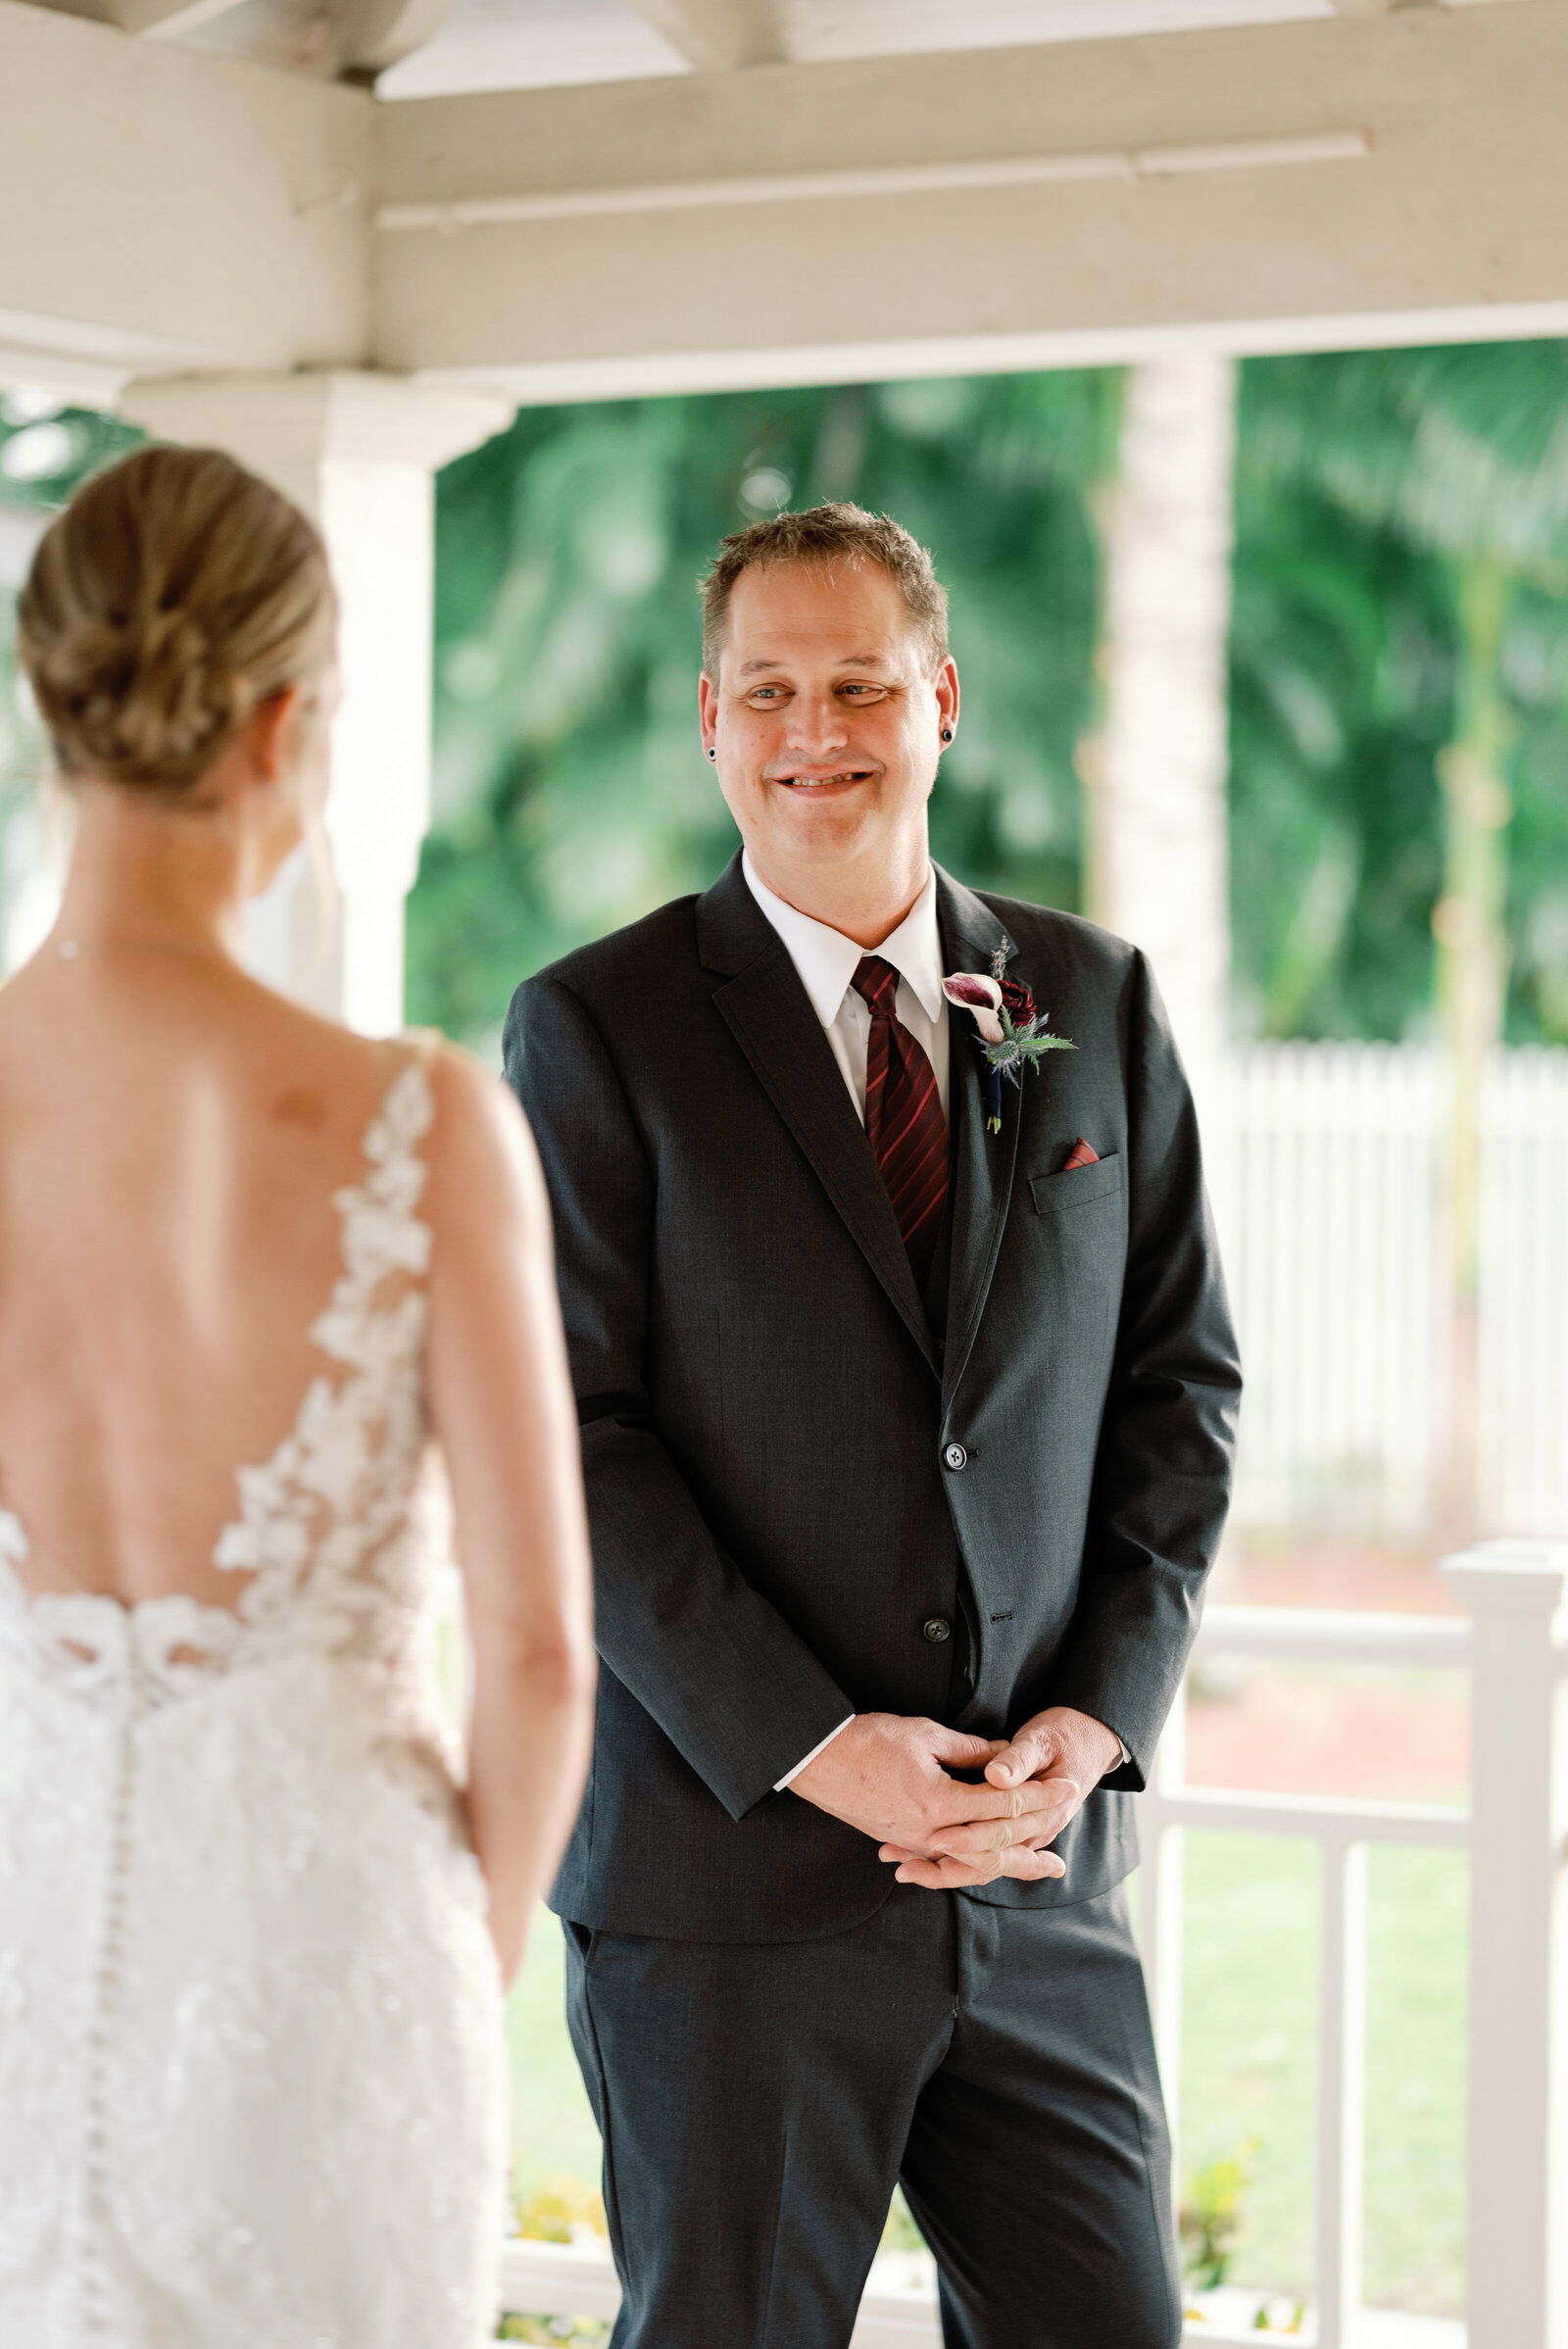 Groom smiling at his bride while seeing her during their wedding day first look